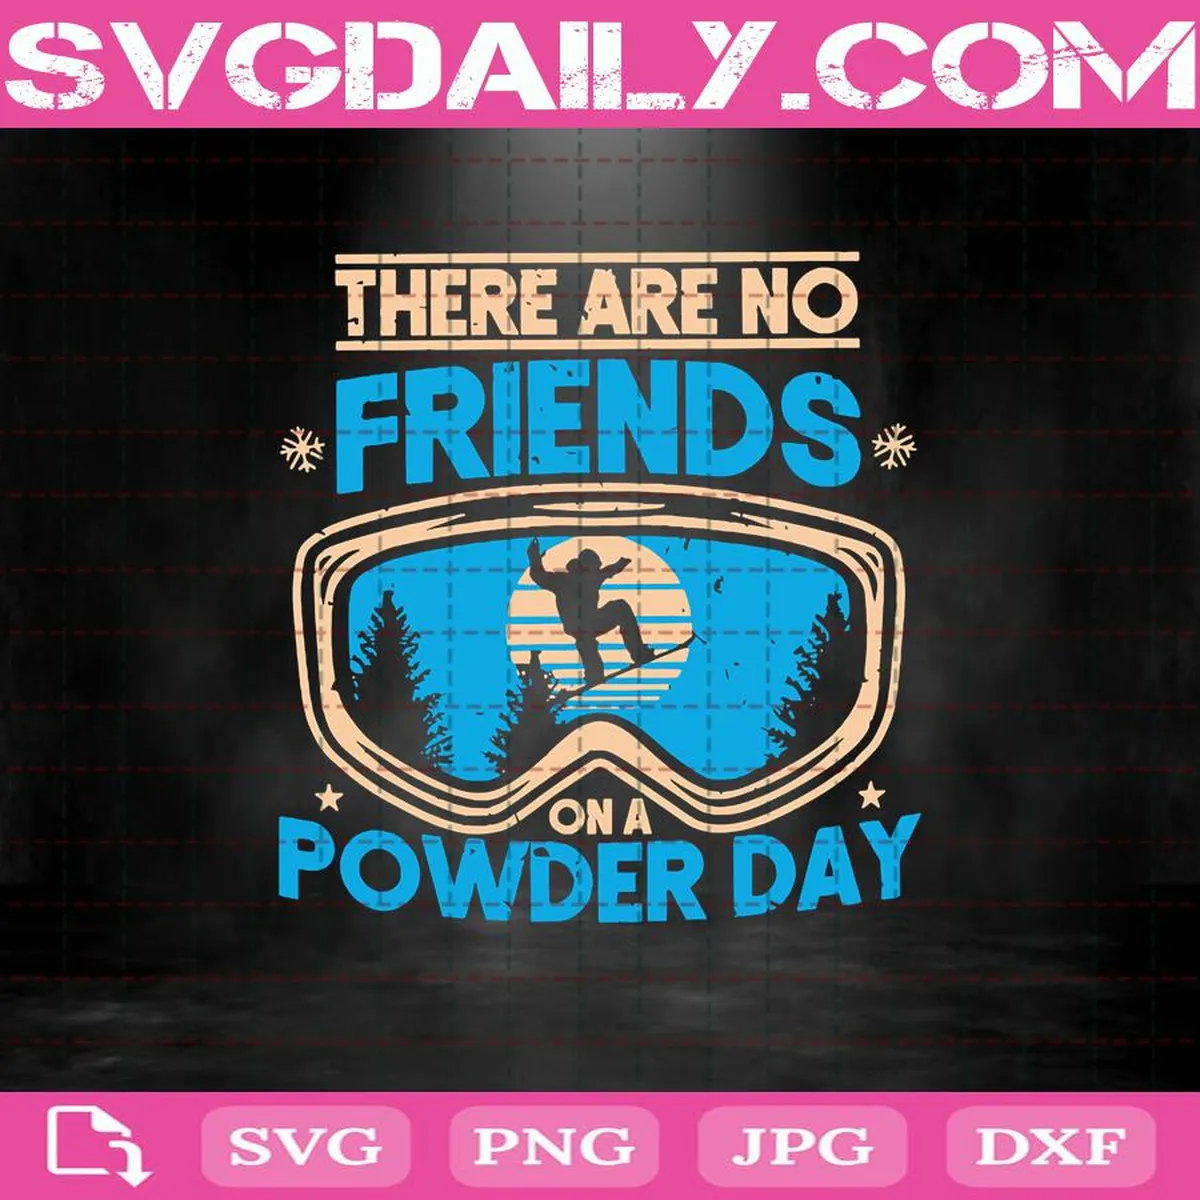 There Are No Friends On A Powder Day Svg, Jungle Svg, A Powder Day Svg, Friends Svg, Svg Png Dxf Eps AI Instant Download